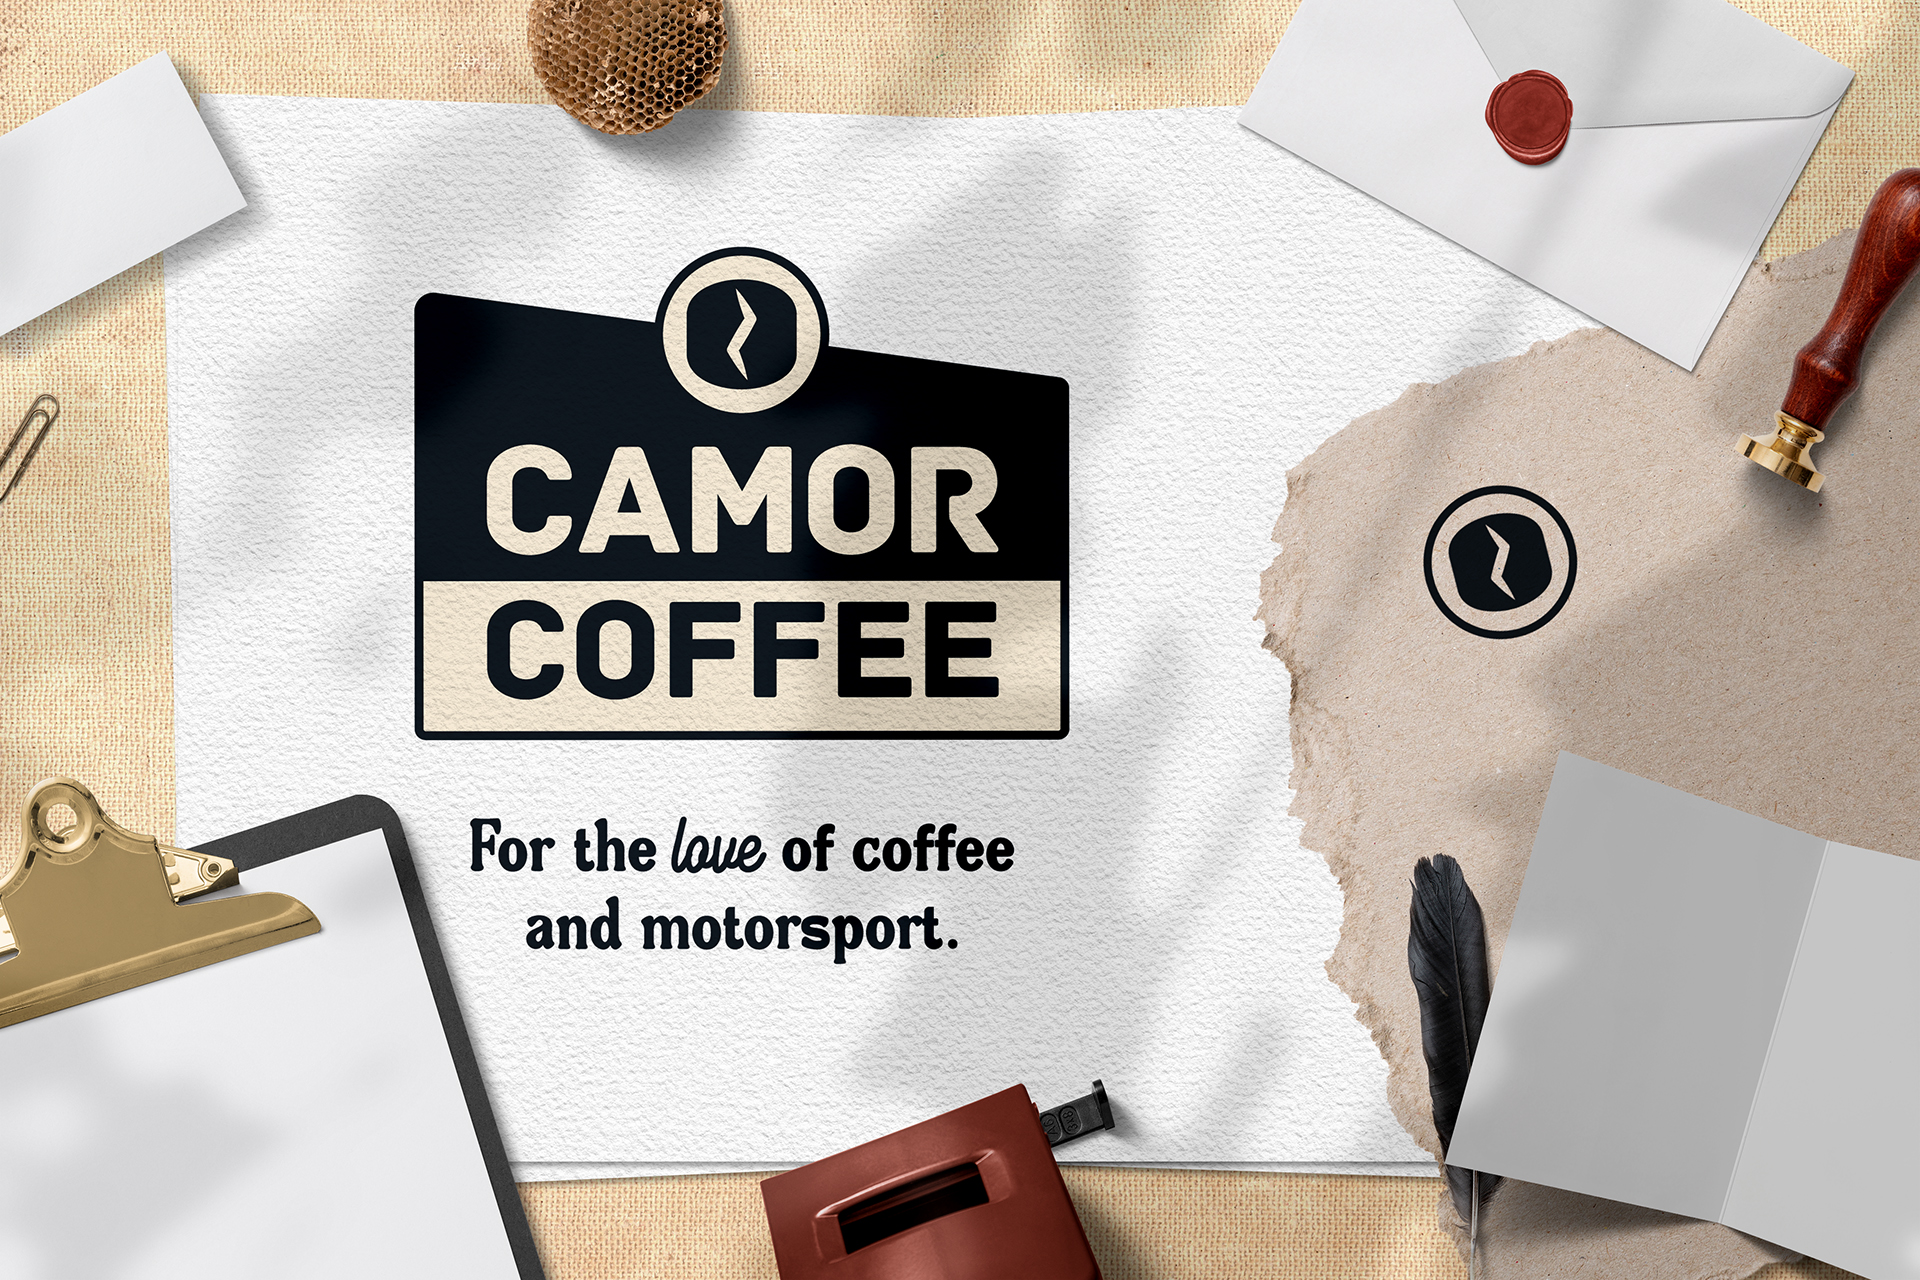 Visual Identity Design elements for Camor Coffee designed by Olive Ridley Studios